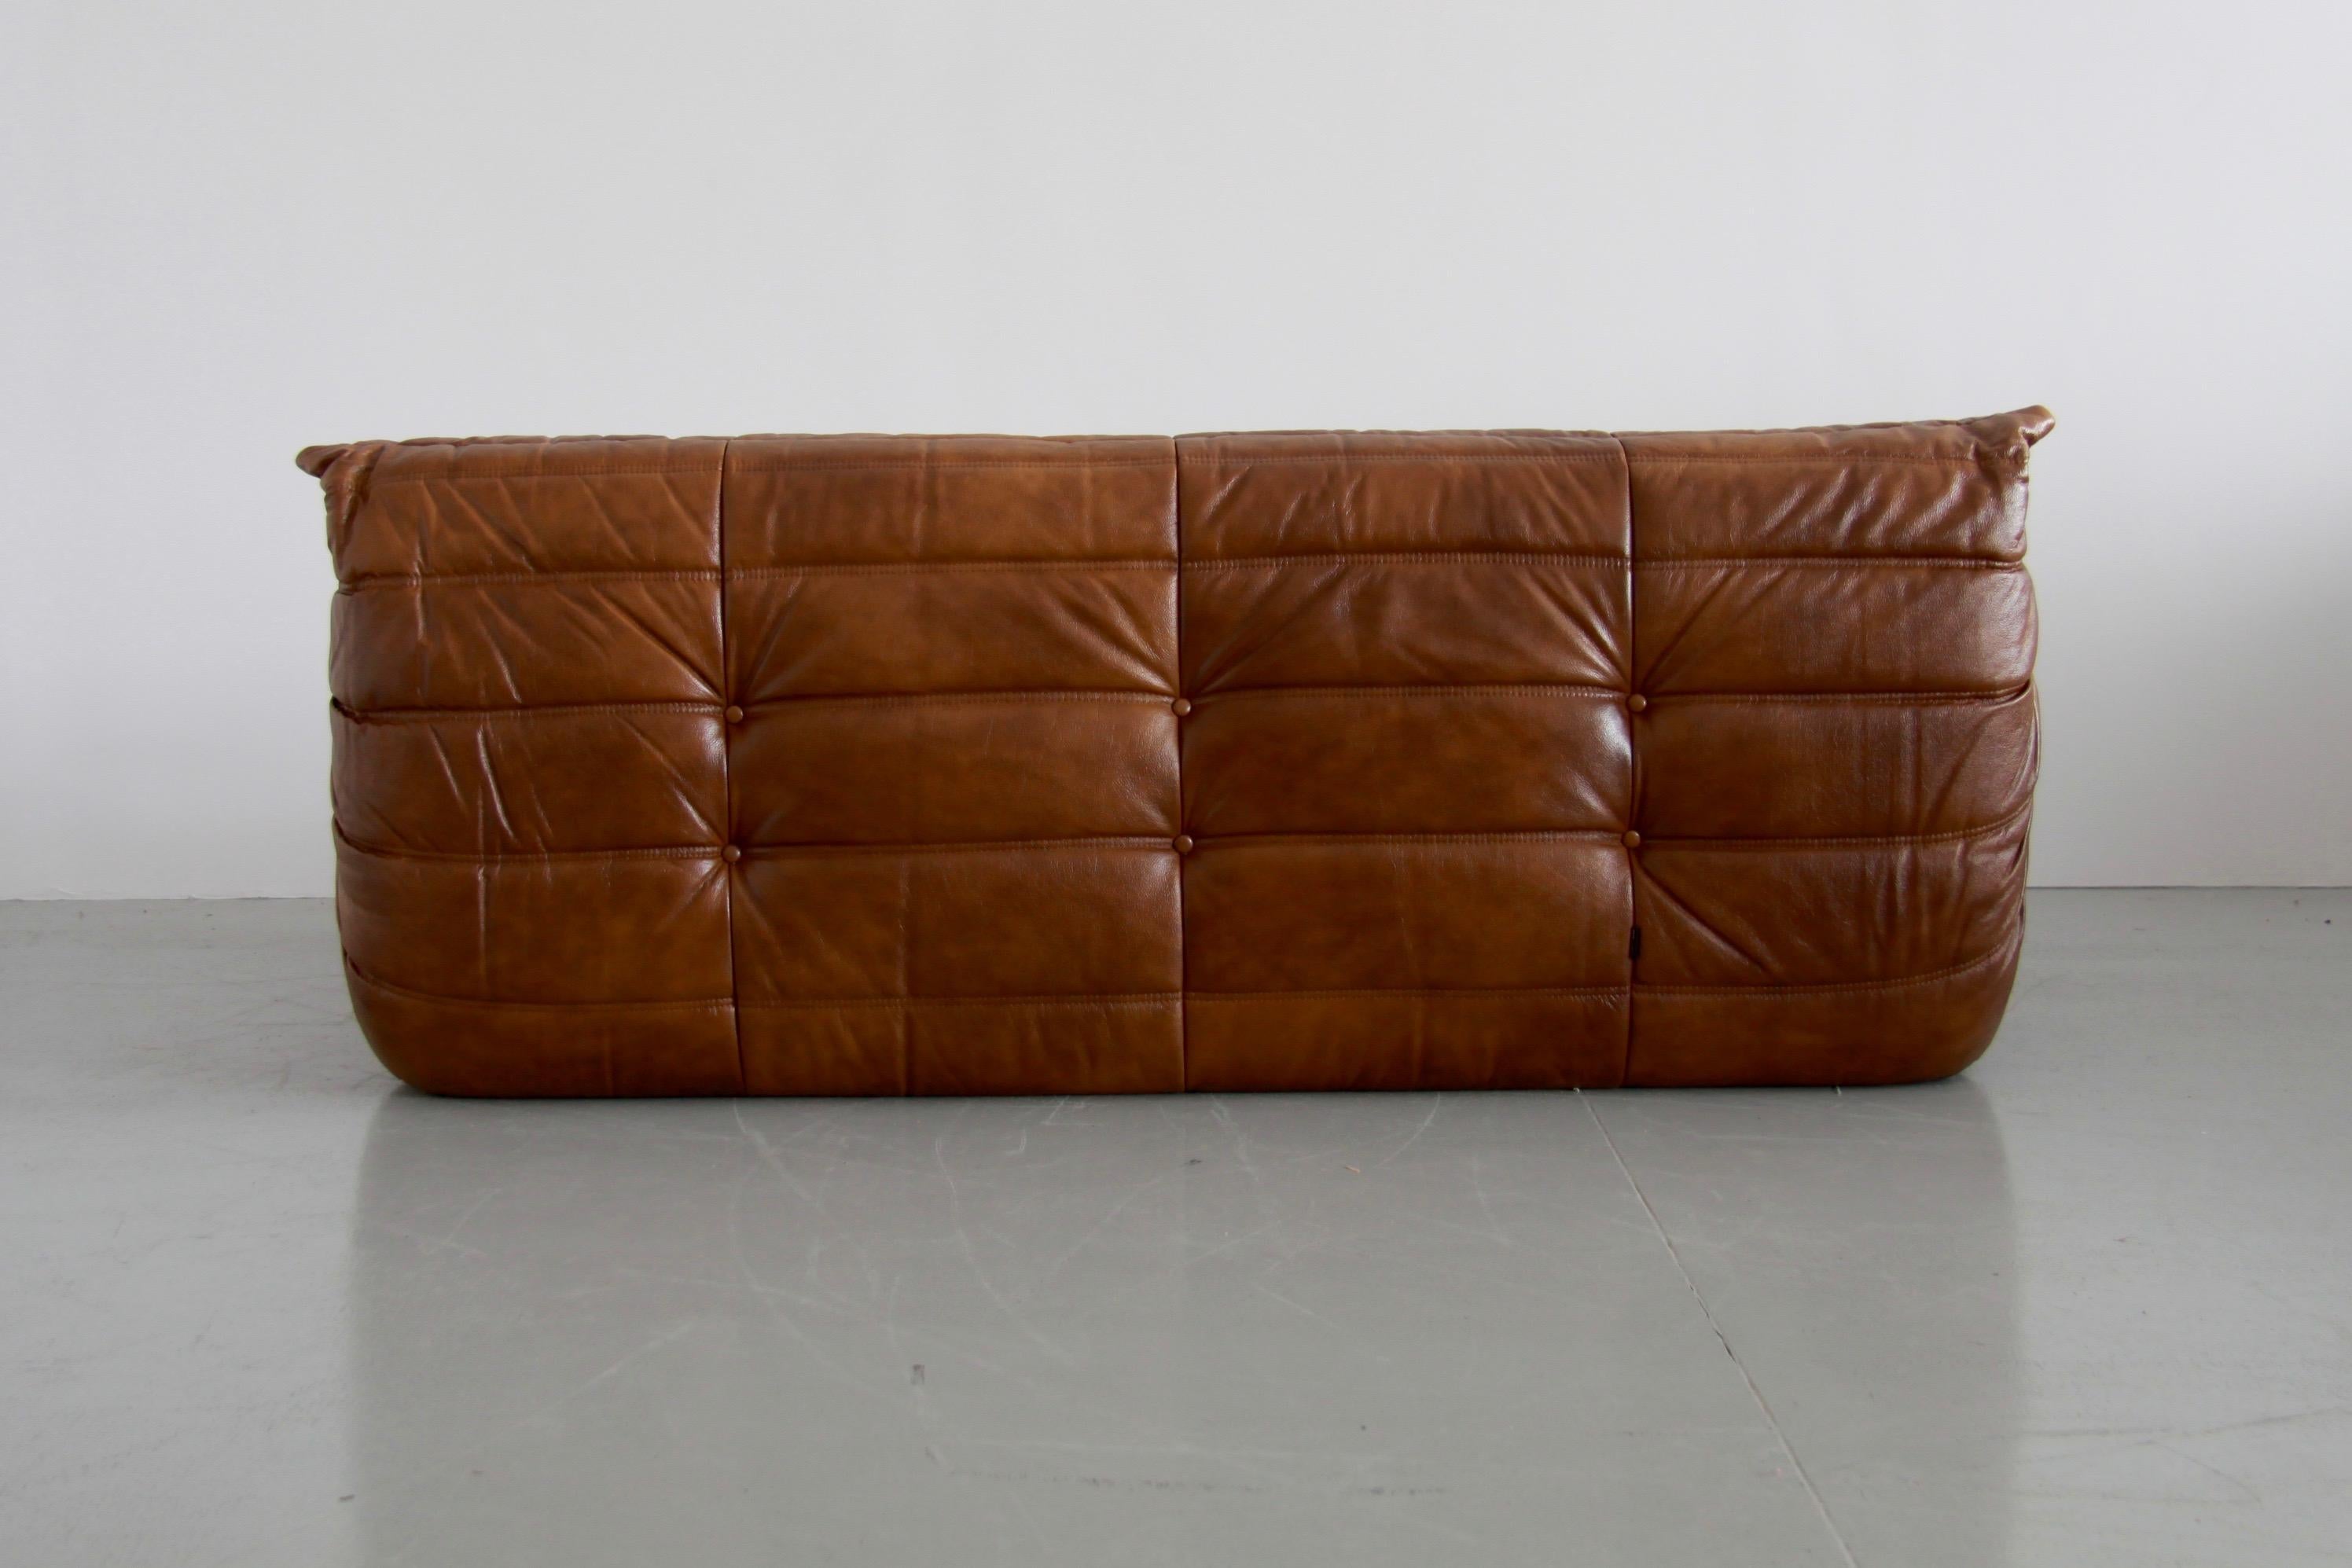 French Togo 3-Seat Sofa in Whiskey Leather by Michel Ducaroy for Ligne Roset